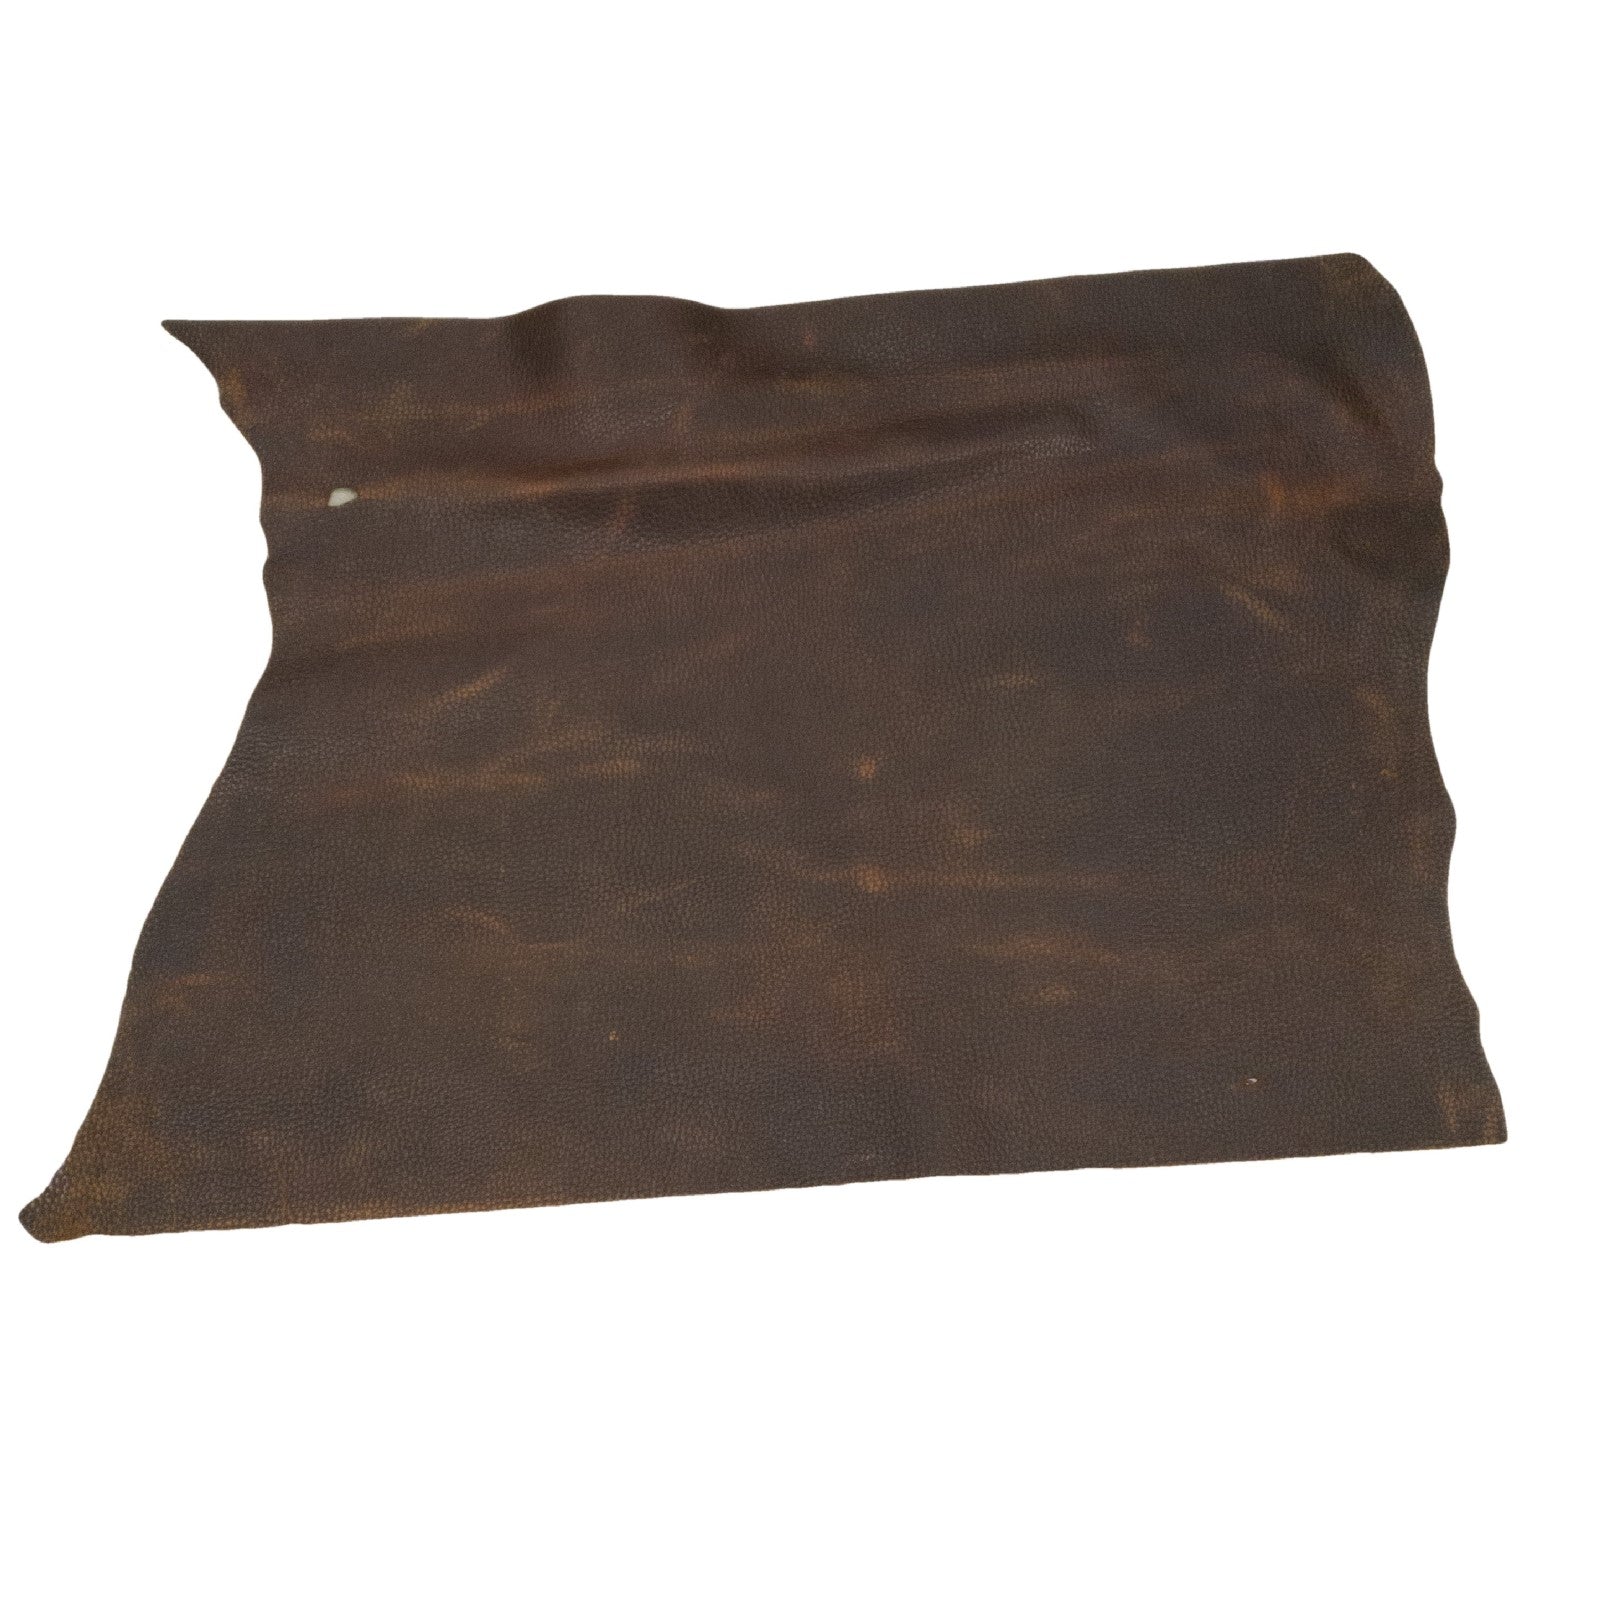 Parachute Pull-up Brown 4-5 oz, 10-29 SqFt, Flyin' Bison Sides and Project Pieces, Middle Piece / 6.5-7.5 Sq Ft | The Leather Guy